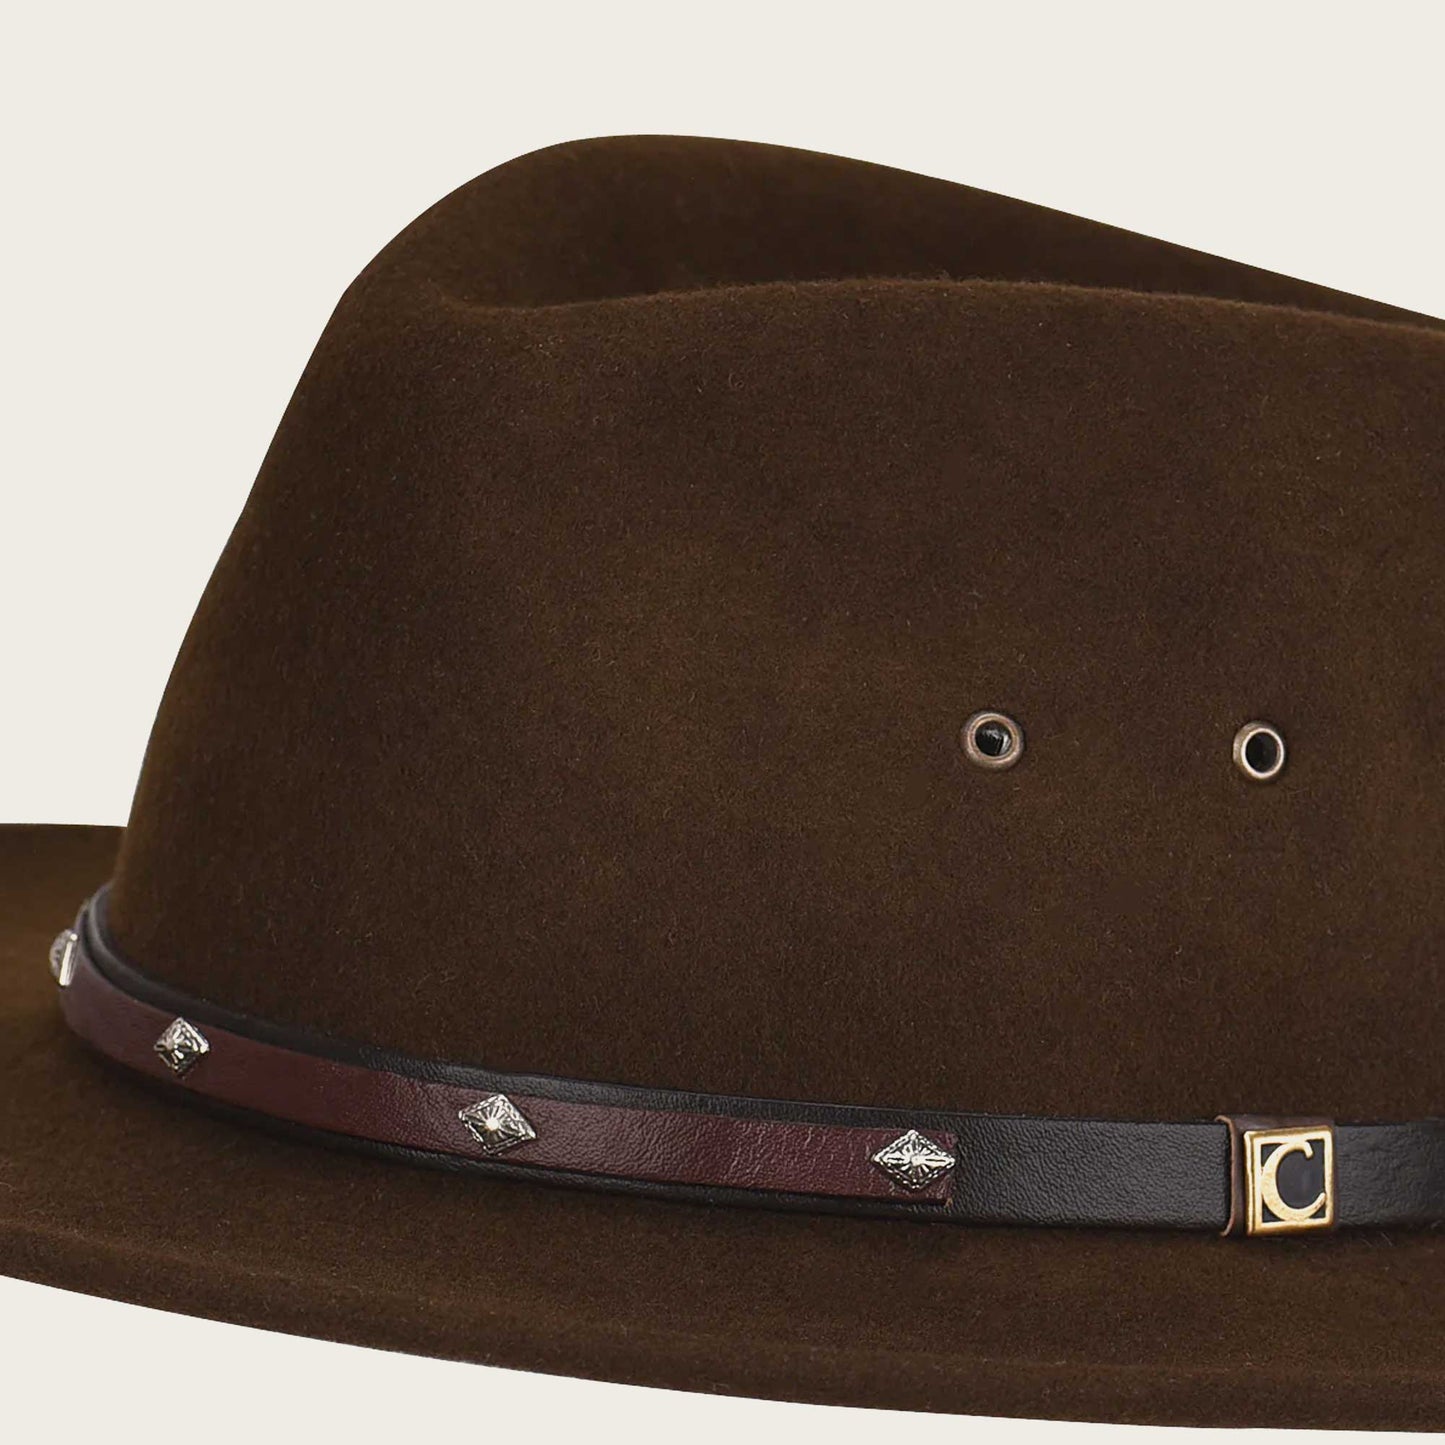 Cuadra brown wool hat with leather belt